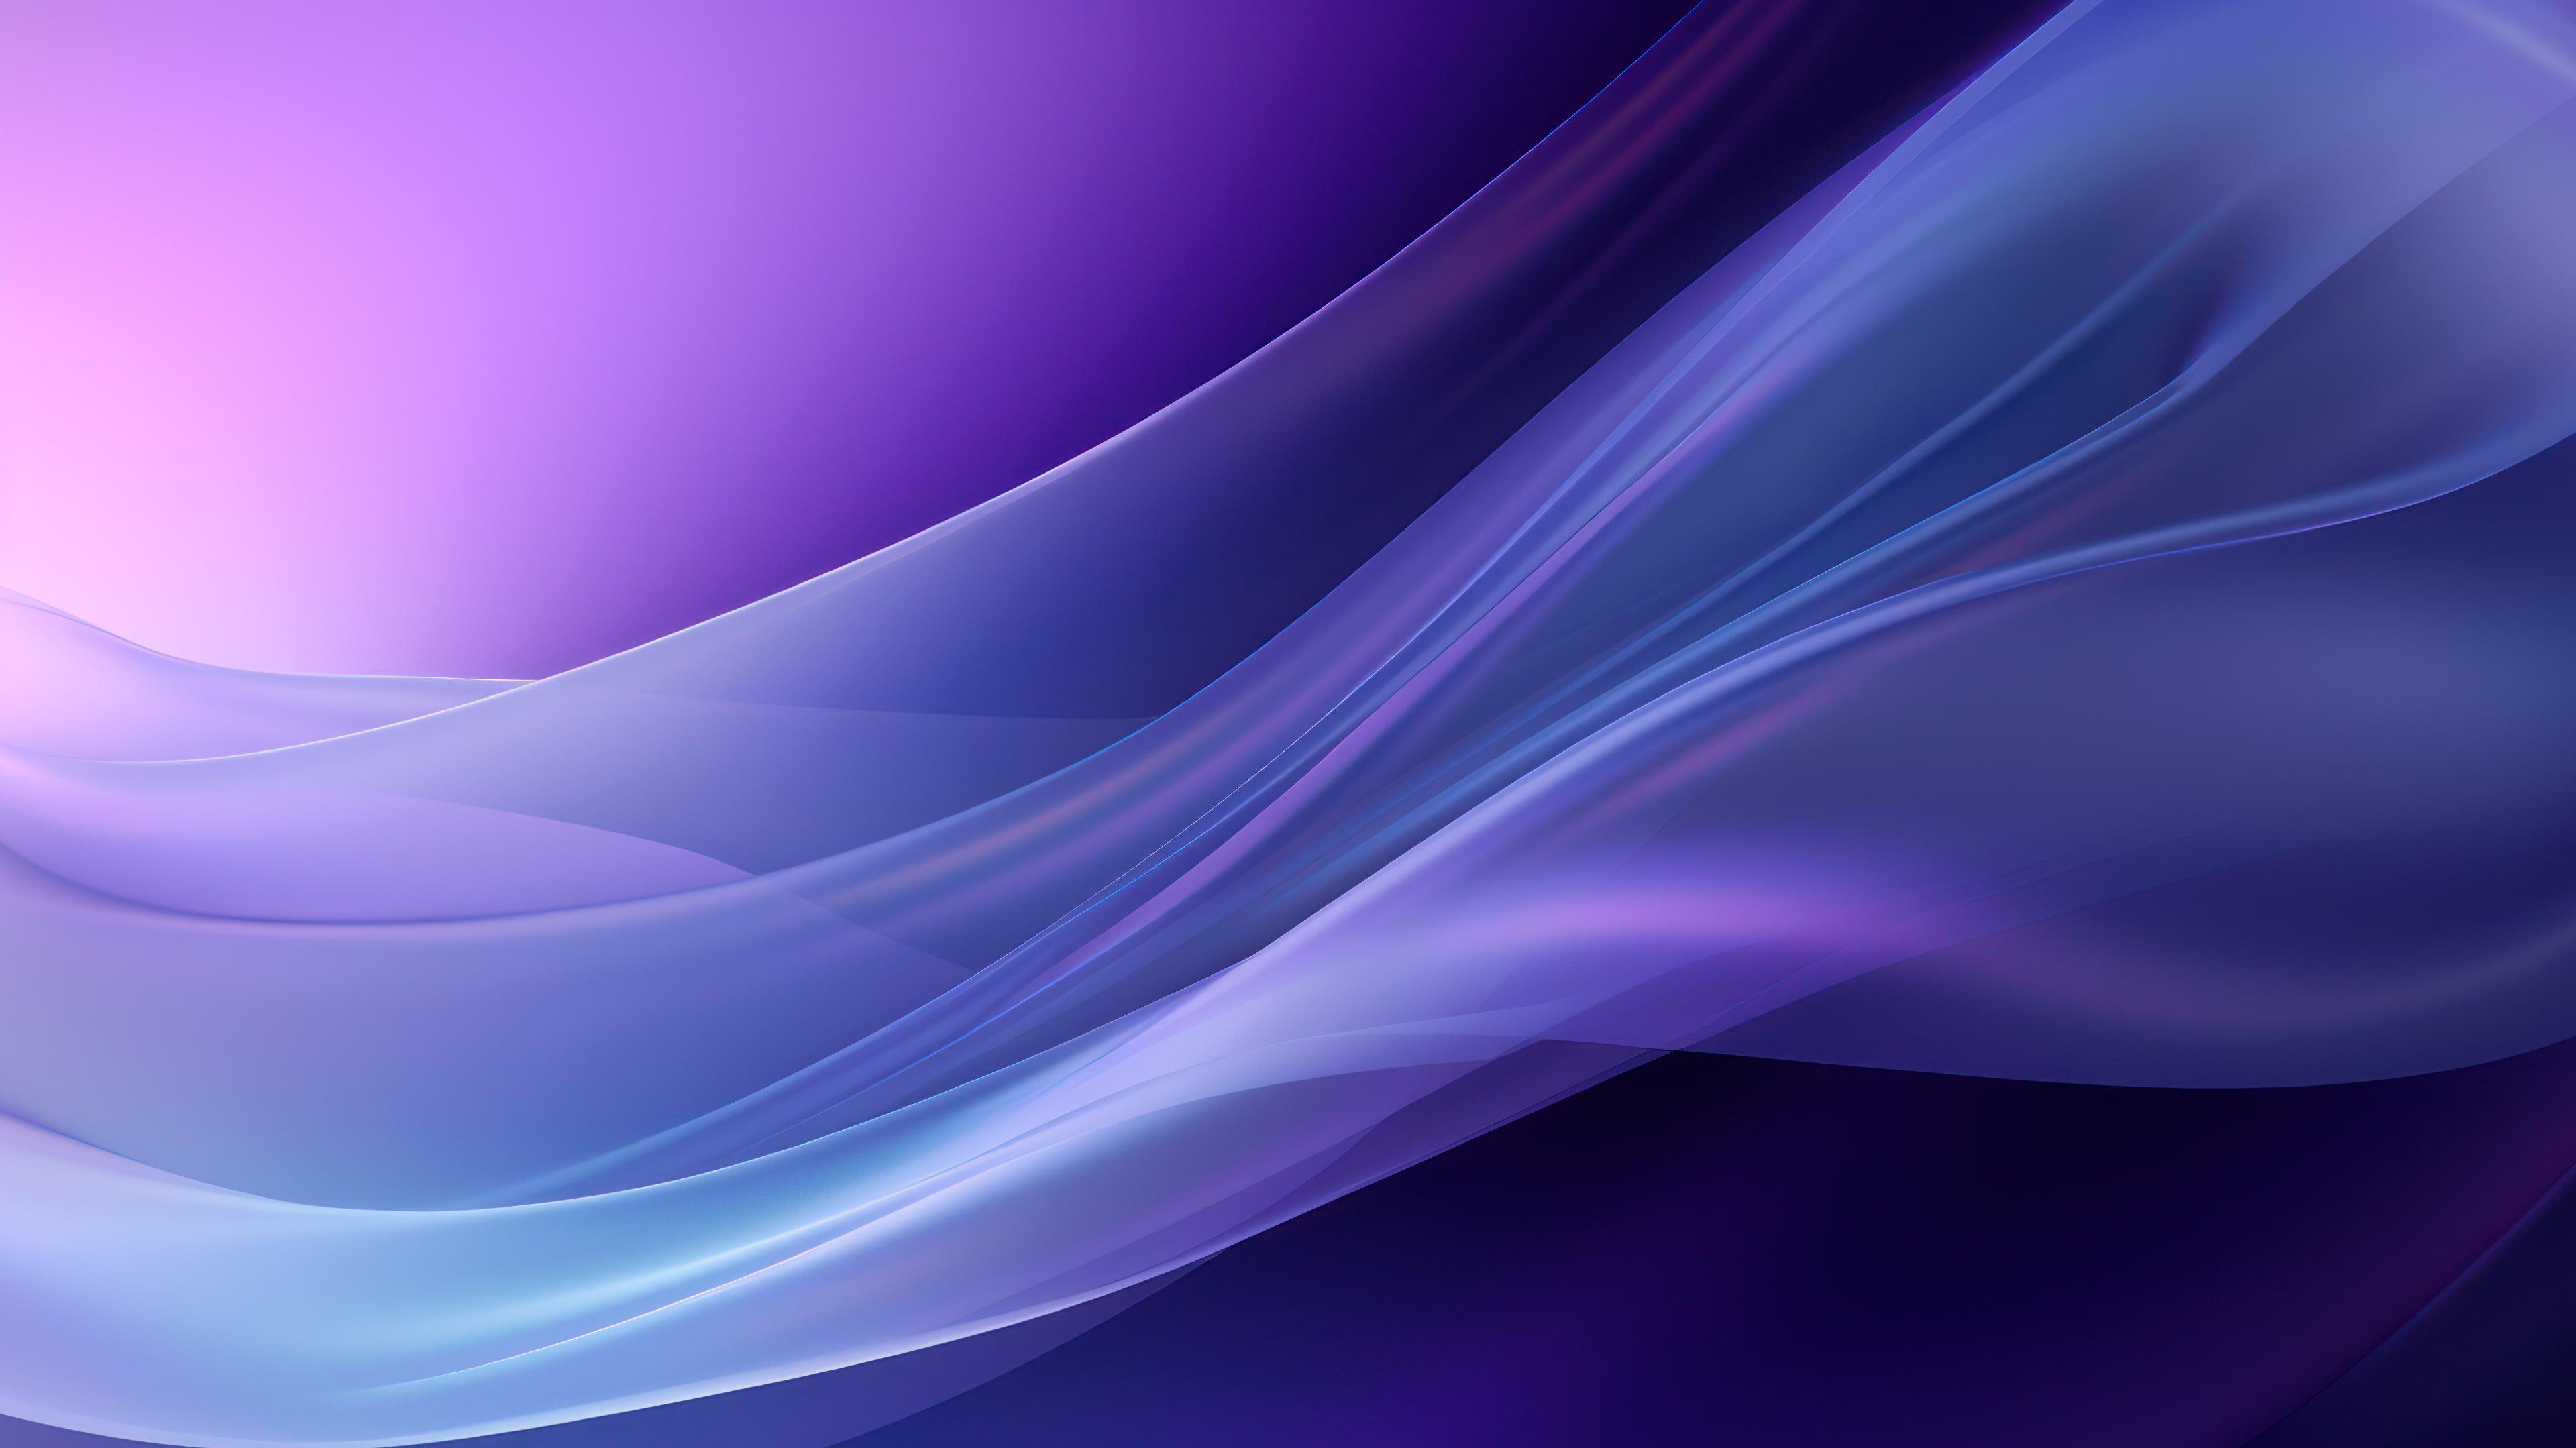 Dark Purple Abstract Shapes 4K phone wallpaper [2610x5655] and